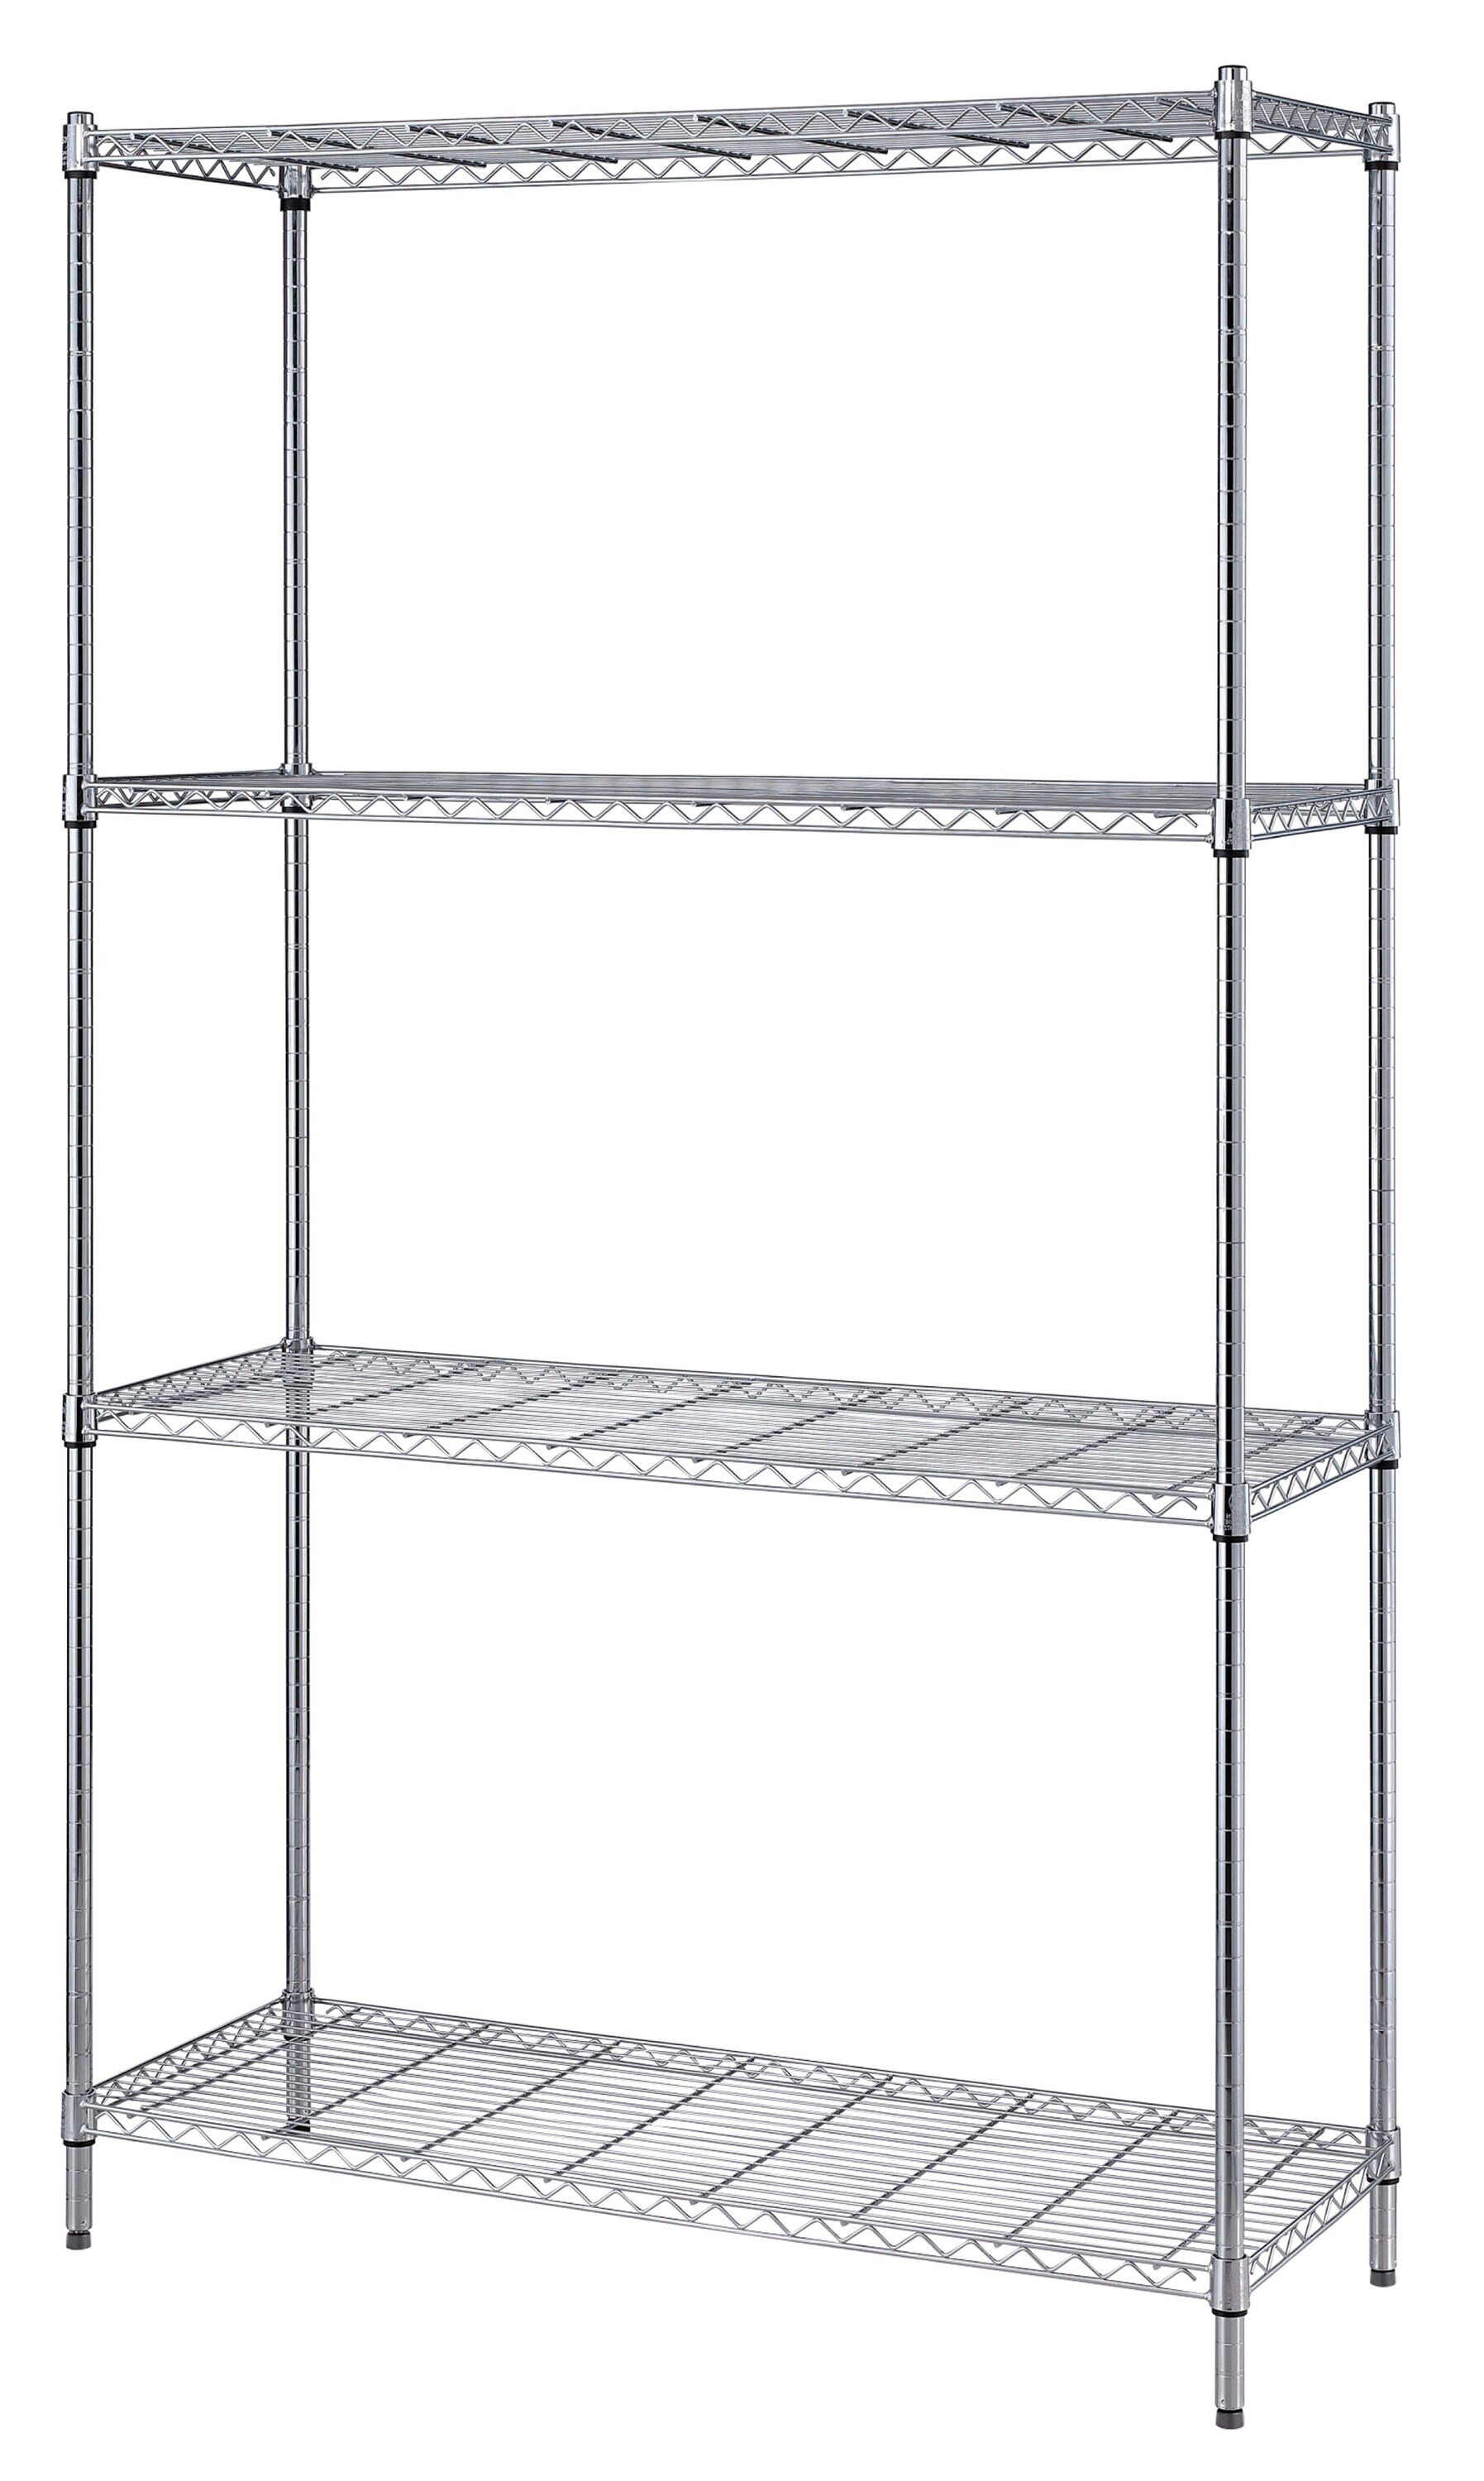 Large SortWise ® 4-Tier Heavy Duty Adjustable Chrome Plated Steel Wire Shelving Storage Shelf System 54-inch 